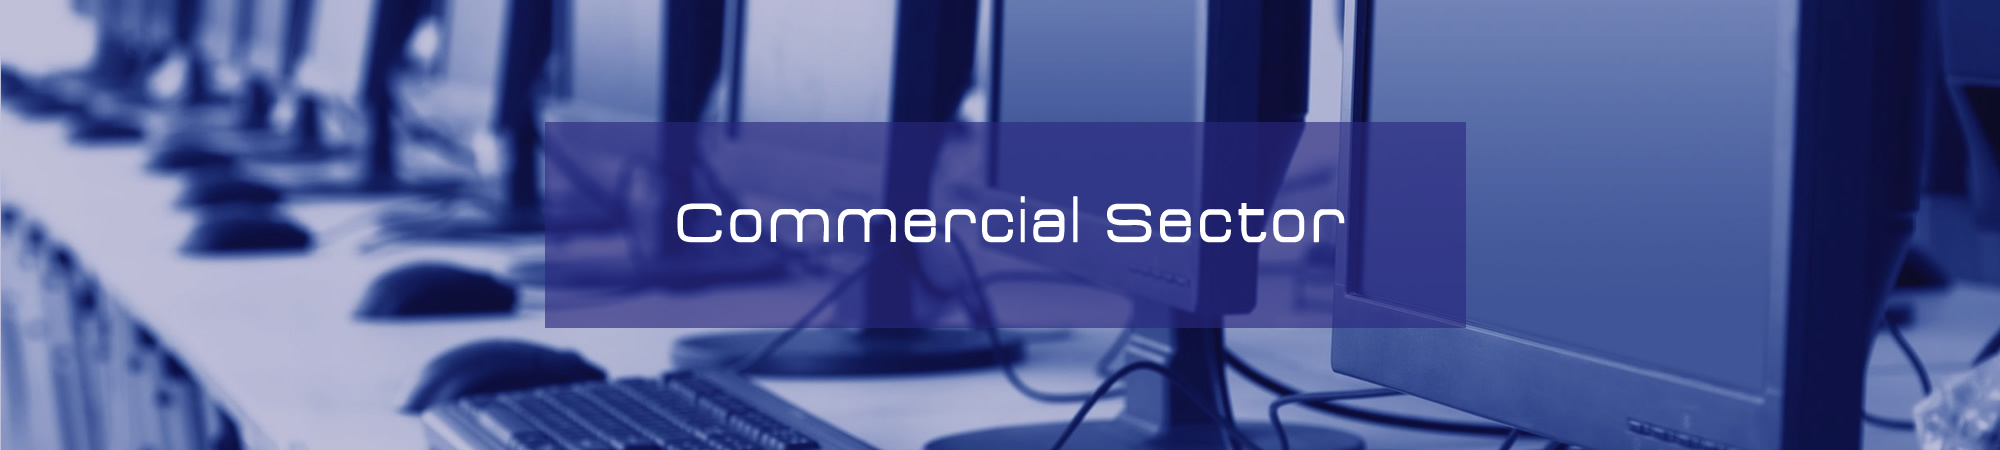 Commercial Sector